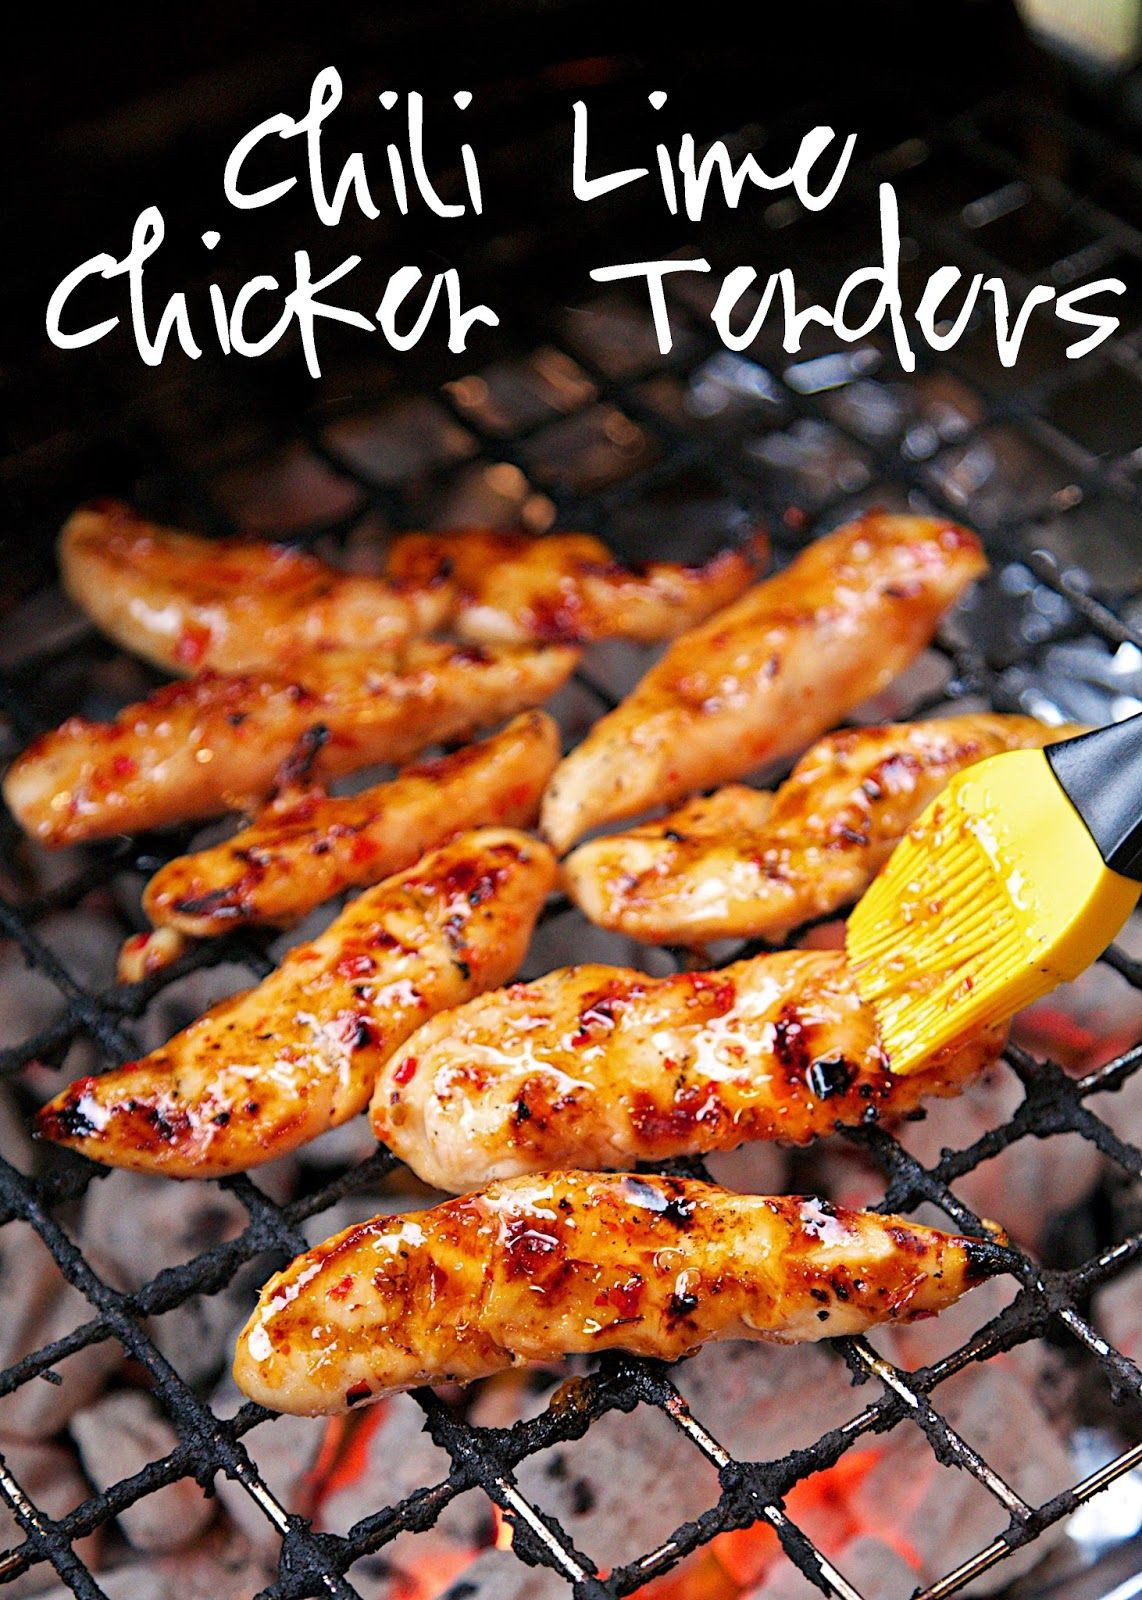 Grill Chicken Tenders
 The 25 best Grilled chicken tenders ideas on Pinterest